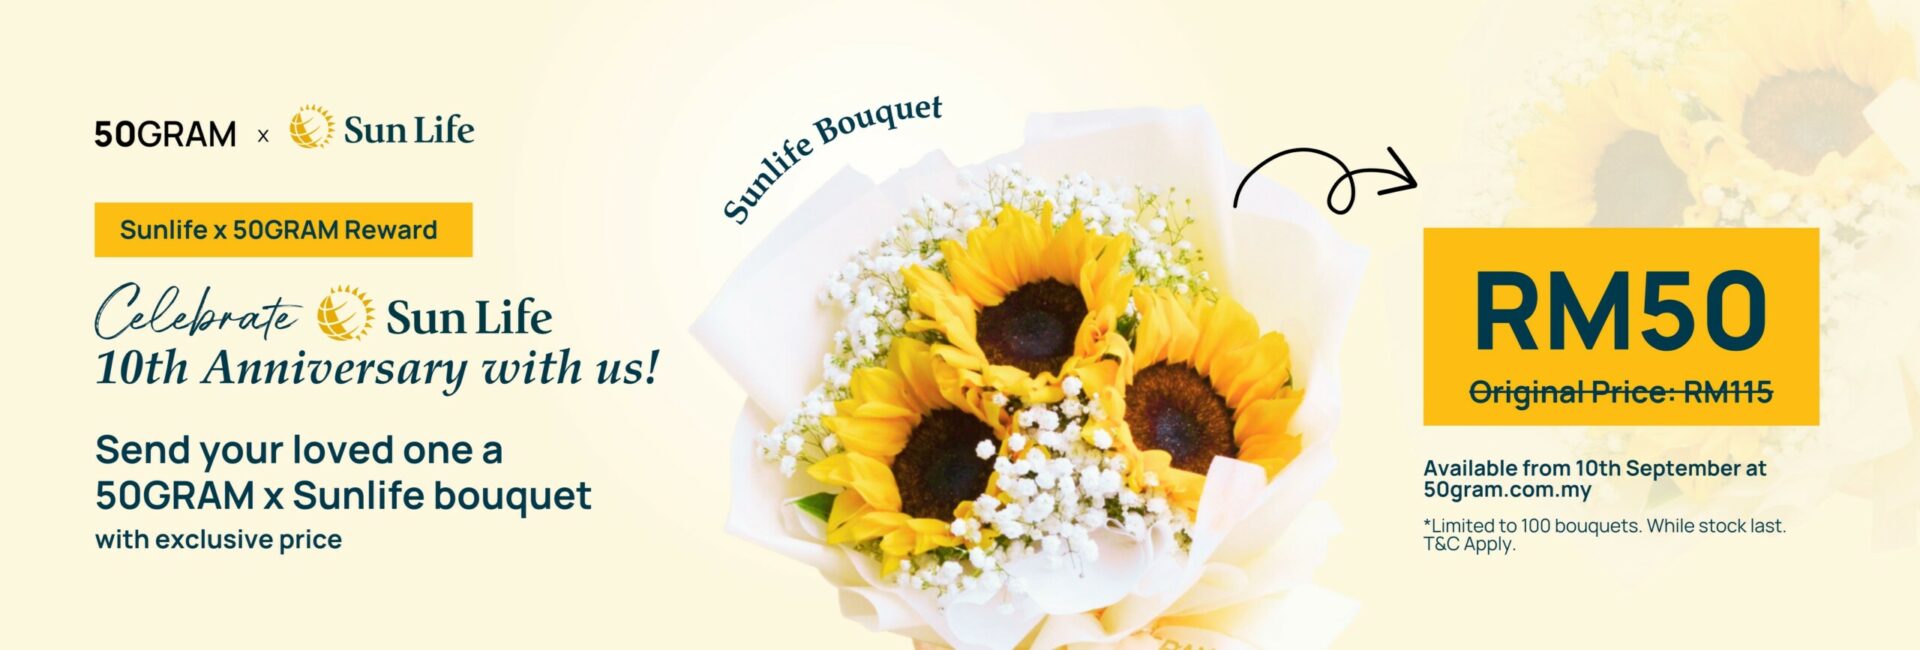 Fg sunlife bouquet banner 1920 × 650 px 1 scaled